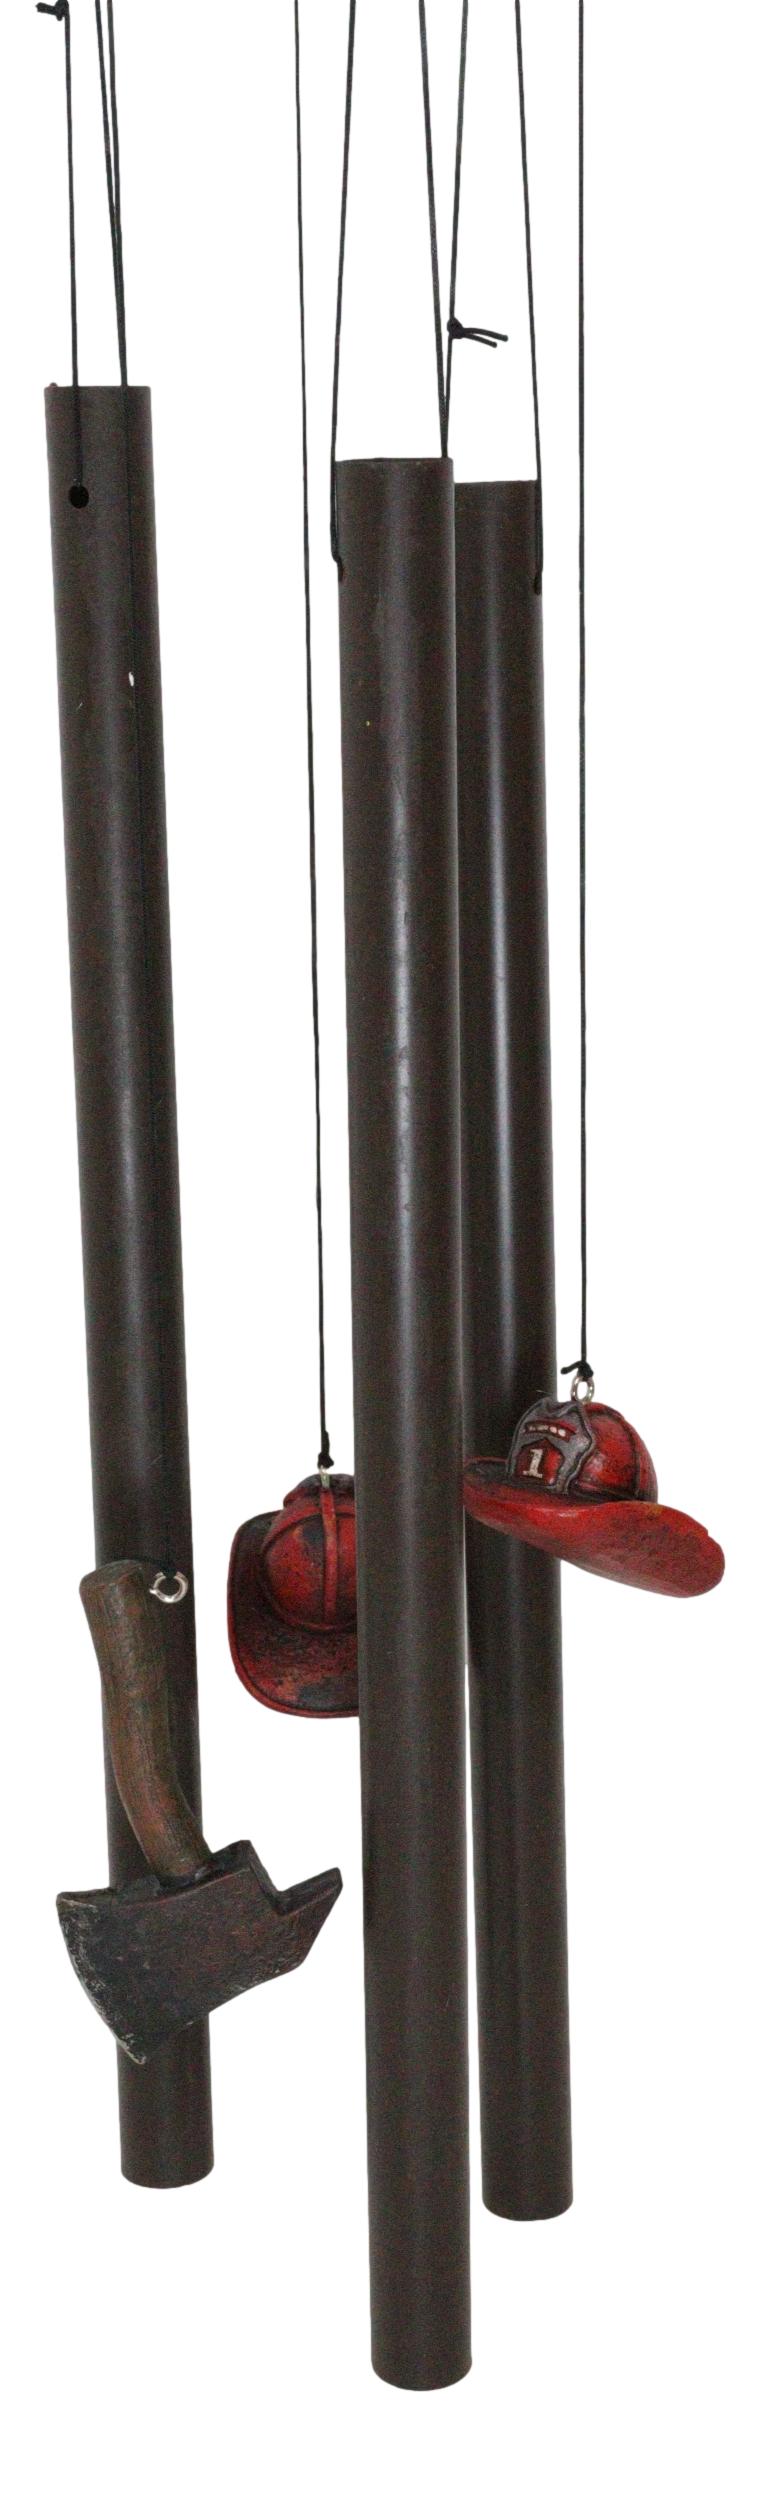 Fire Fighter Axe Fireman Station Number 1 Hat with Coiled Water Hose Wind Chime